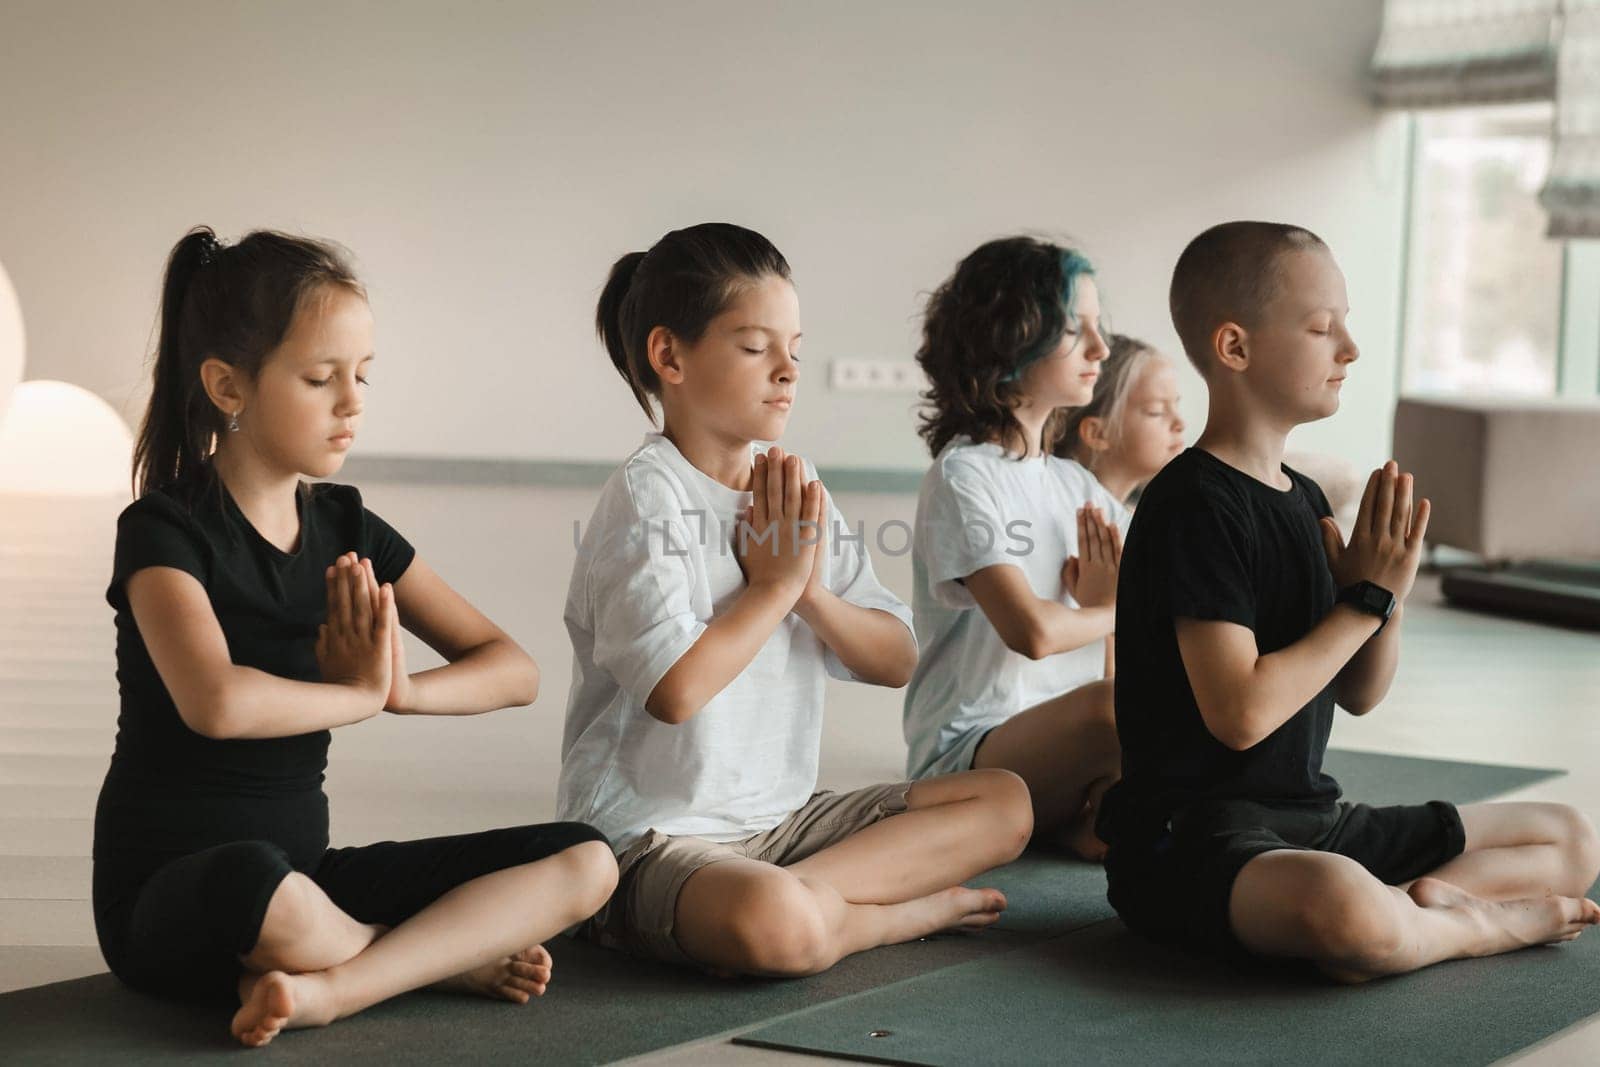 Children sit on mats in the lotus position in Yoga classes. Children's yoga by Lobachad